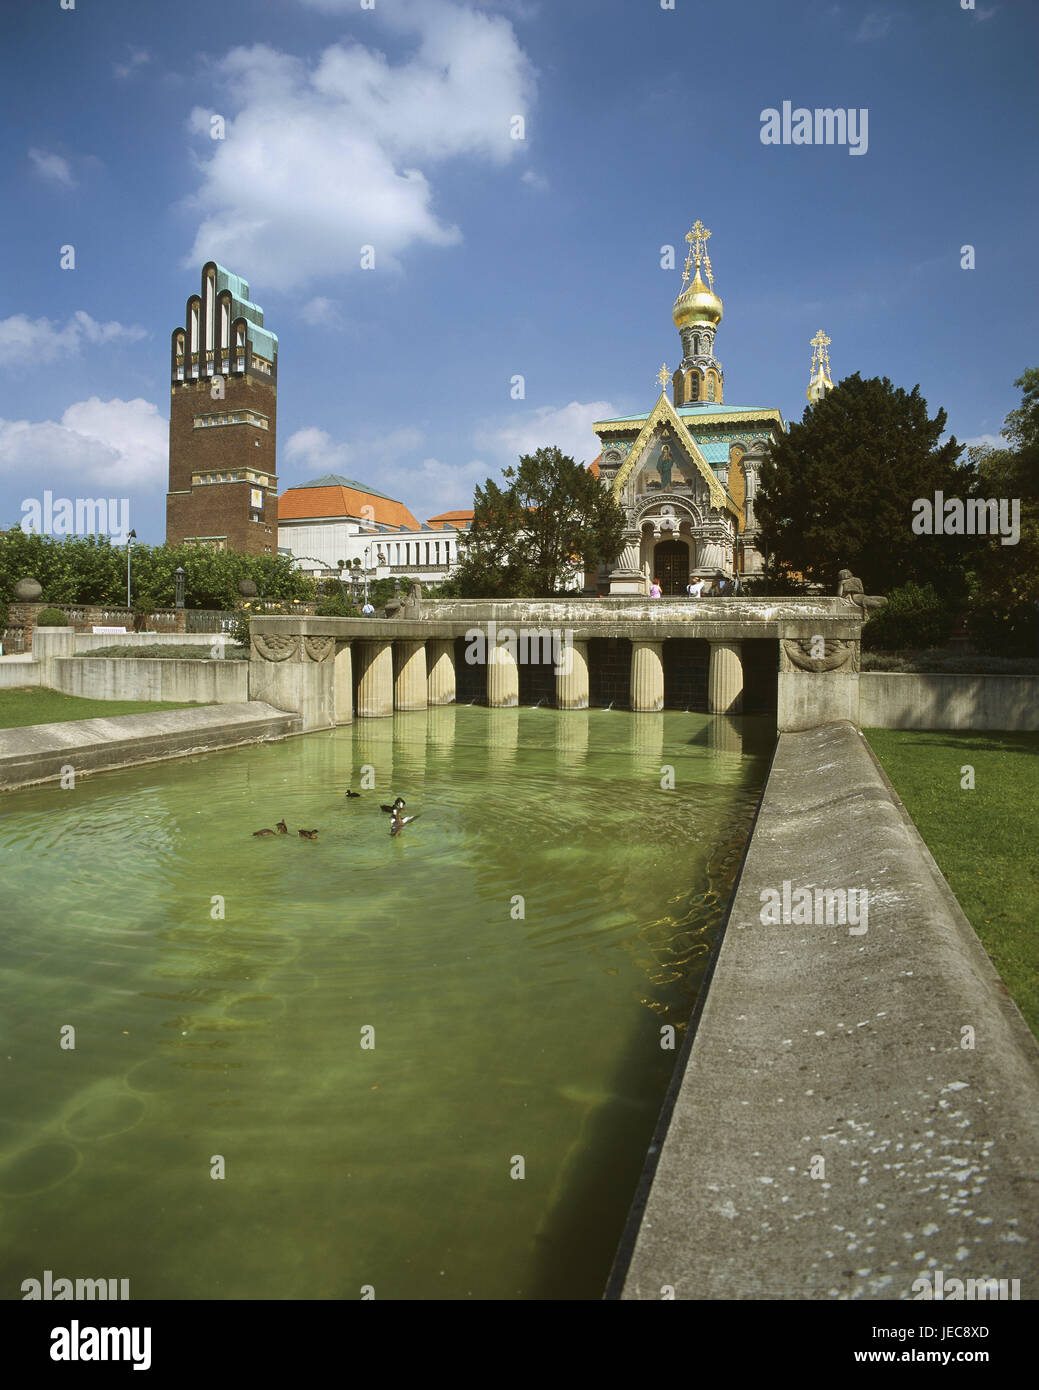 Germany, Hessen, Darmstadt, Mathildenhöhe, Russian band, wedding attack, water cymbal, hill, garden, culture, Maria's Magdalena church, square, waters, cymbal, water, brick tower, '5 finger tower', sacred construction, tower, church, architecture, structures, historically, basin, architecture, place of interest, landmark, Stock Photo